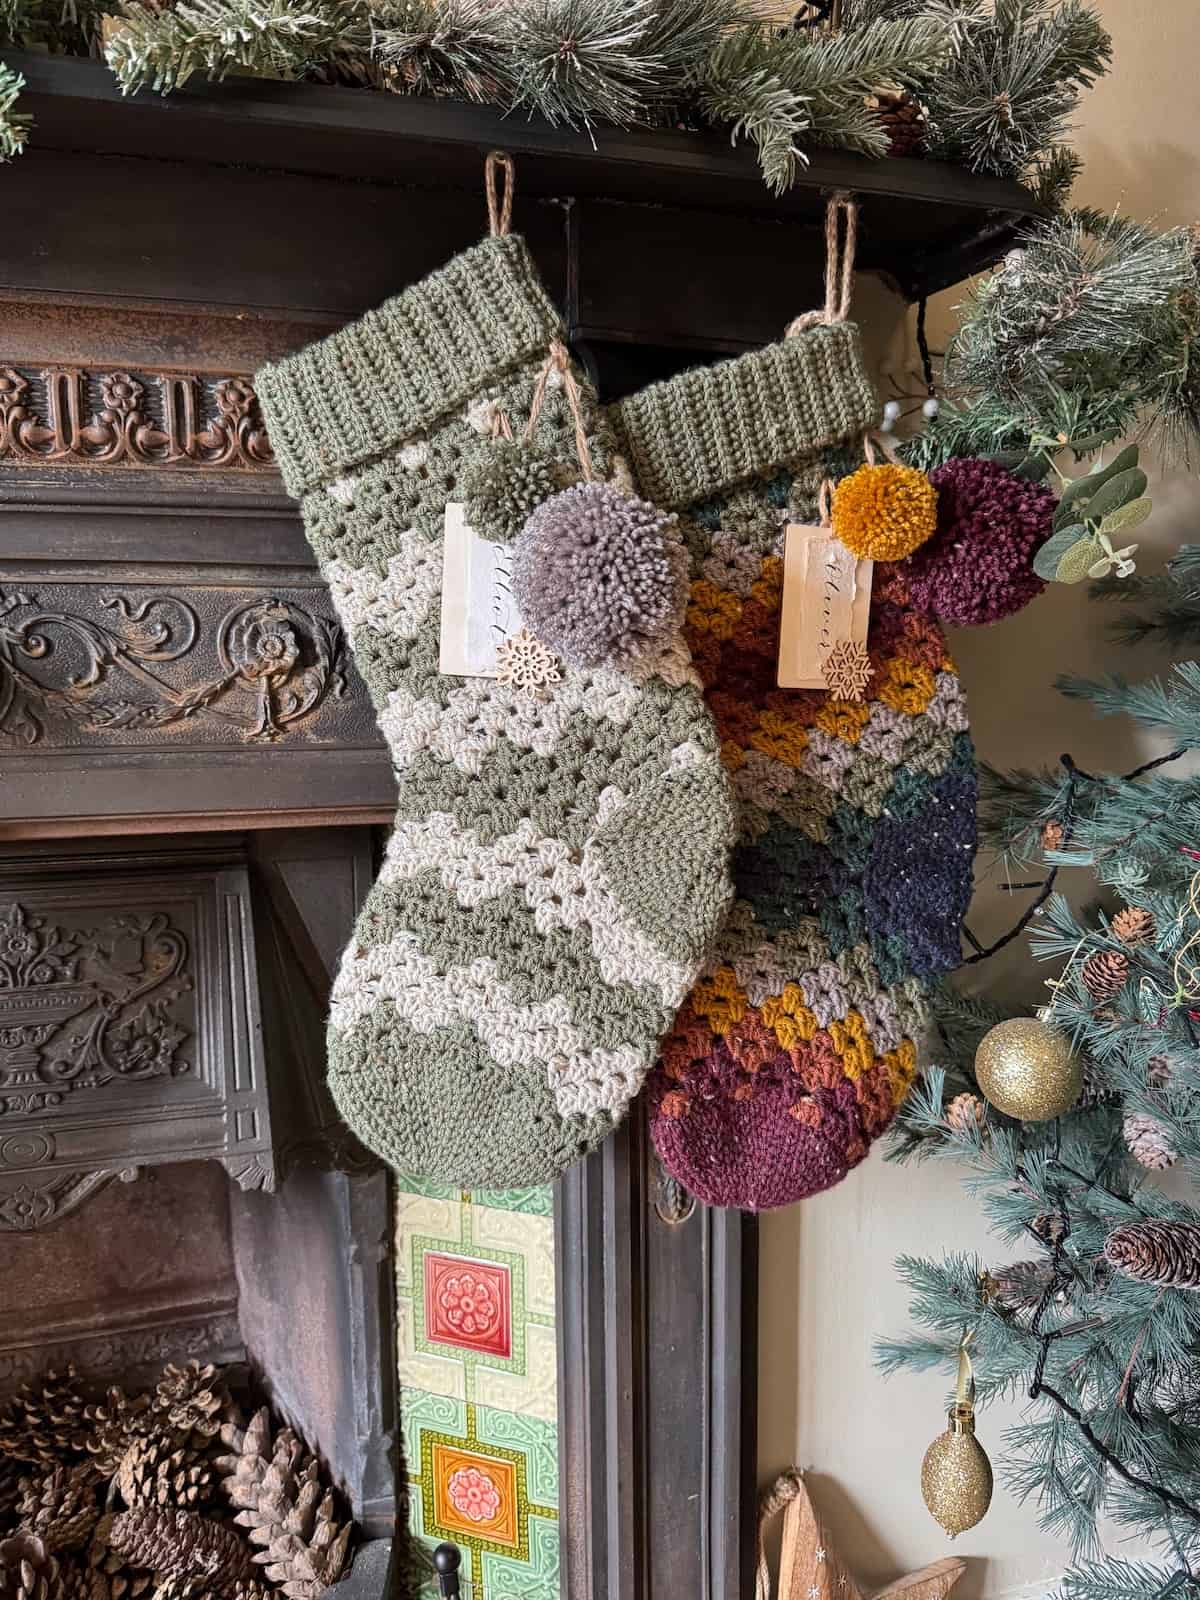 Two knitted christmas stockings hanging on a fireplace.